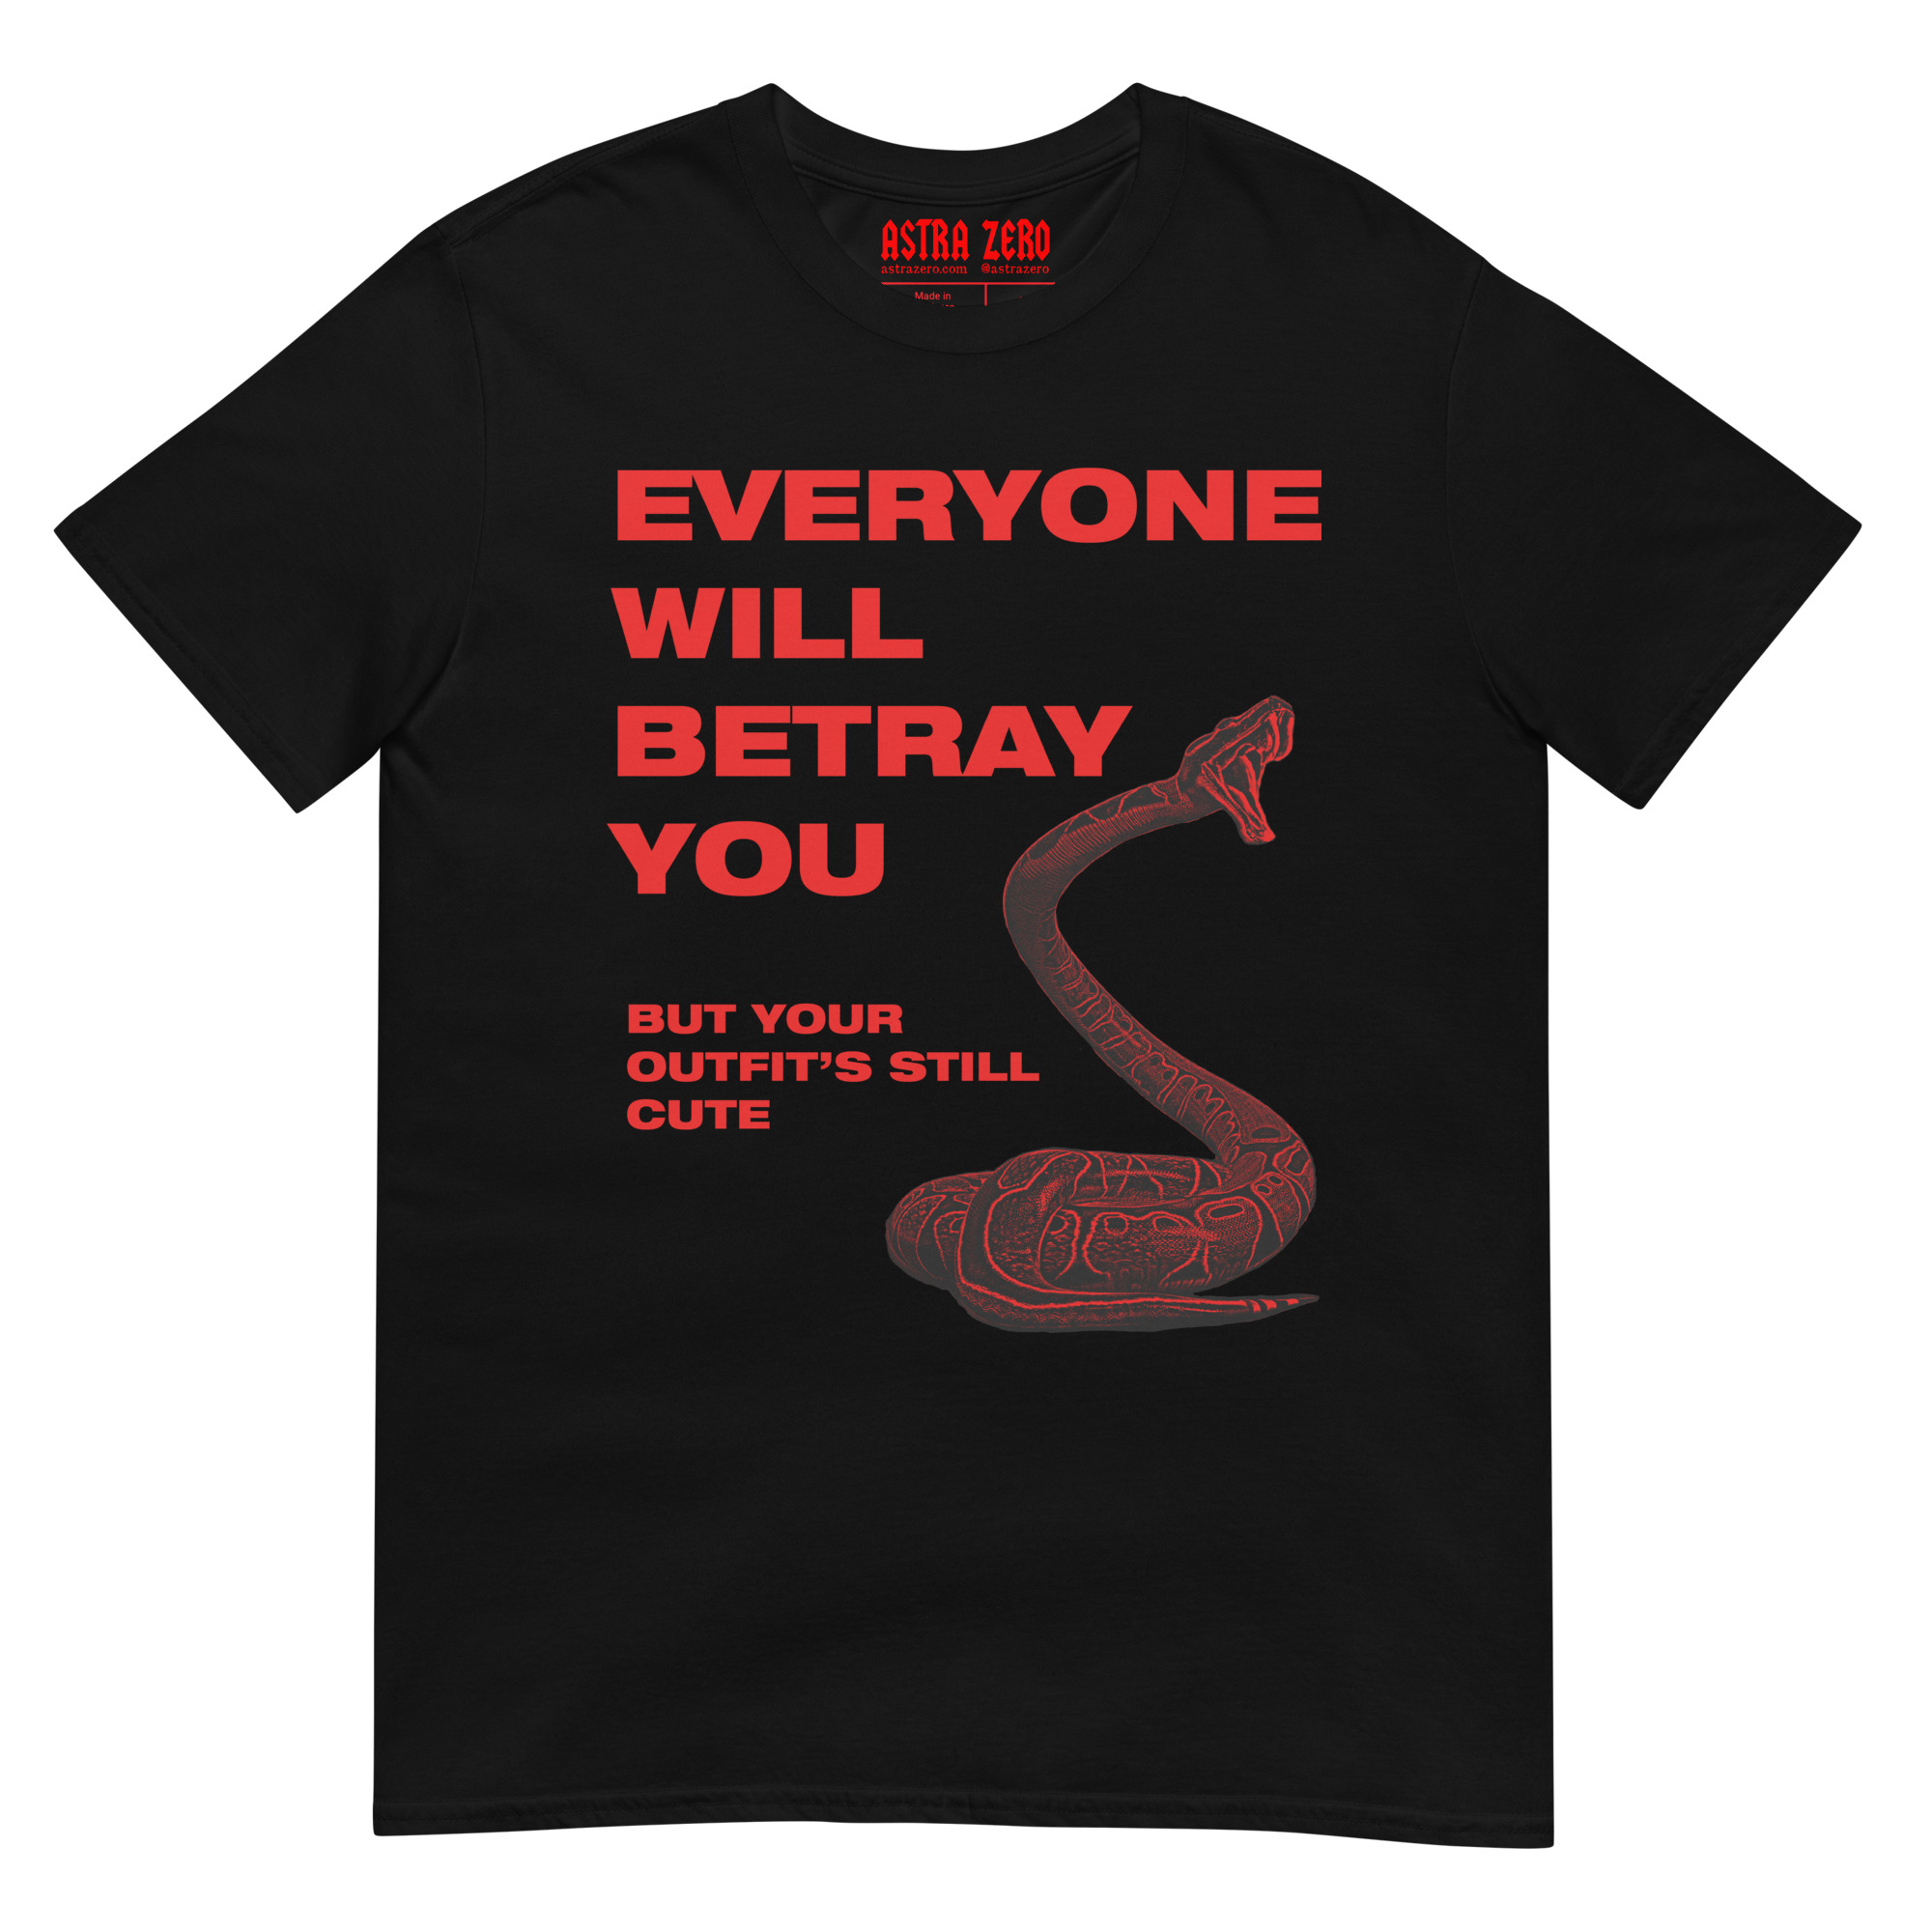 Featured image for “Everyone will Betray You, but. - Short-Sleeve Unisex T-Shirt”